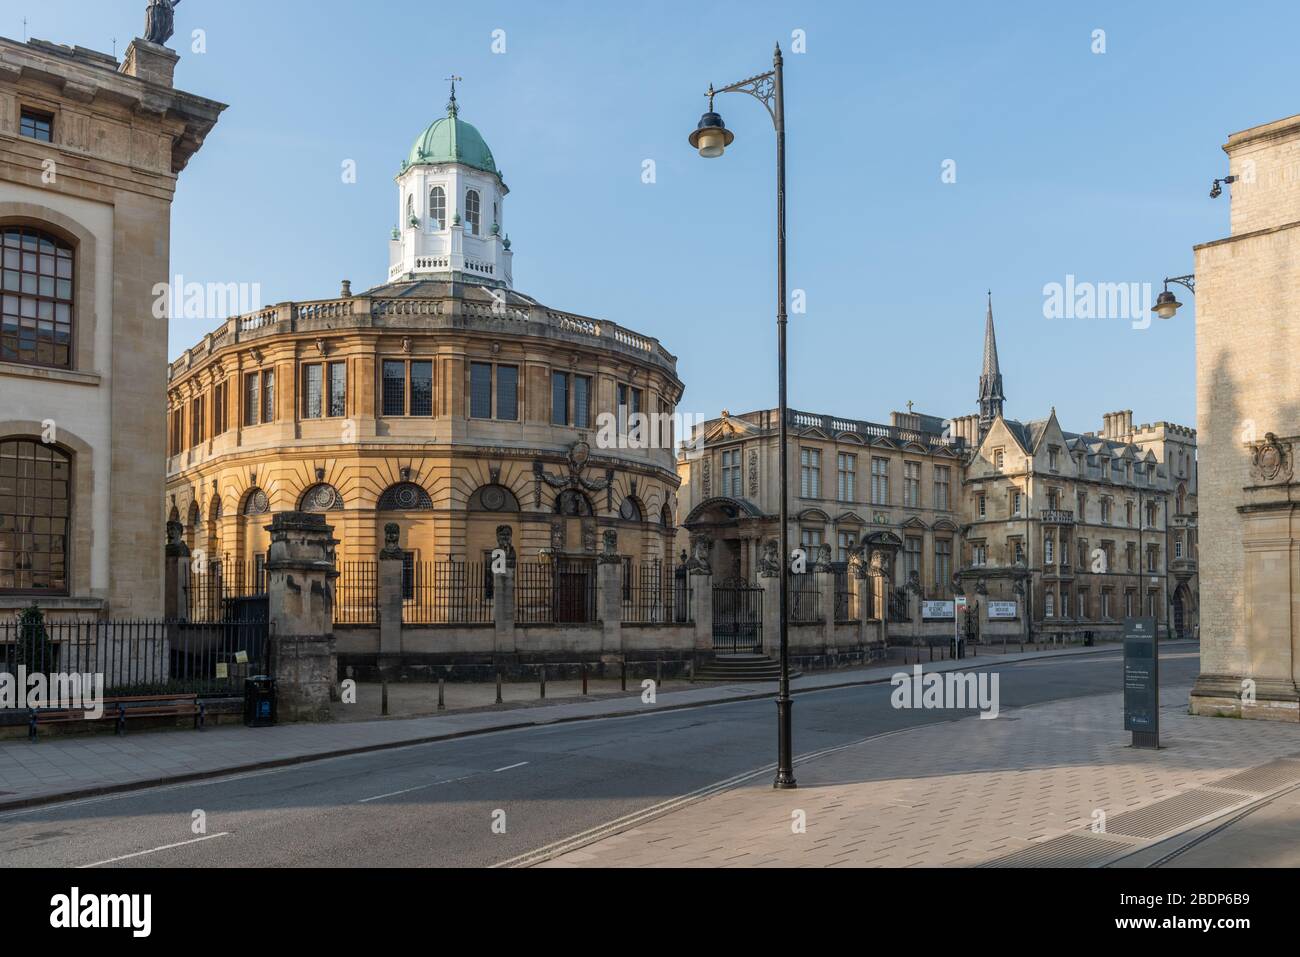 The Sheldonian Theatre on Broad Street, Oxford Stock Photo